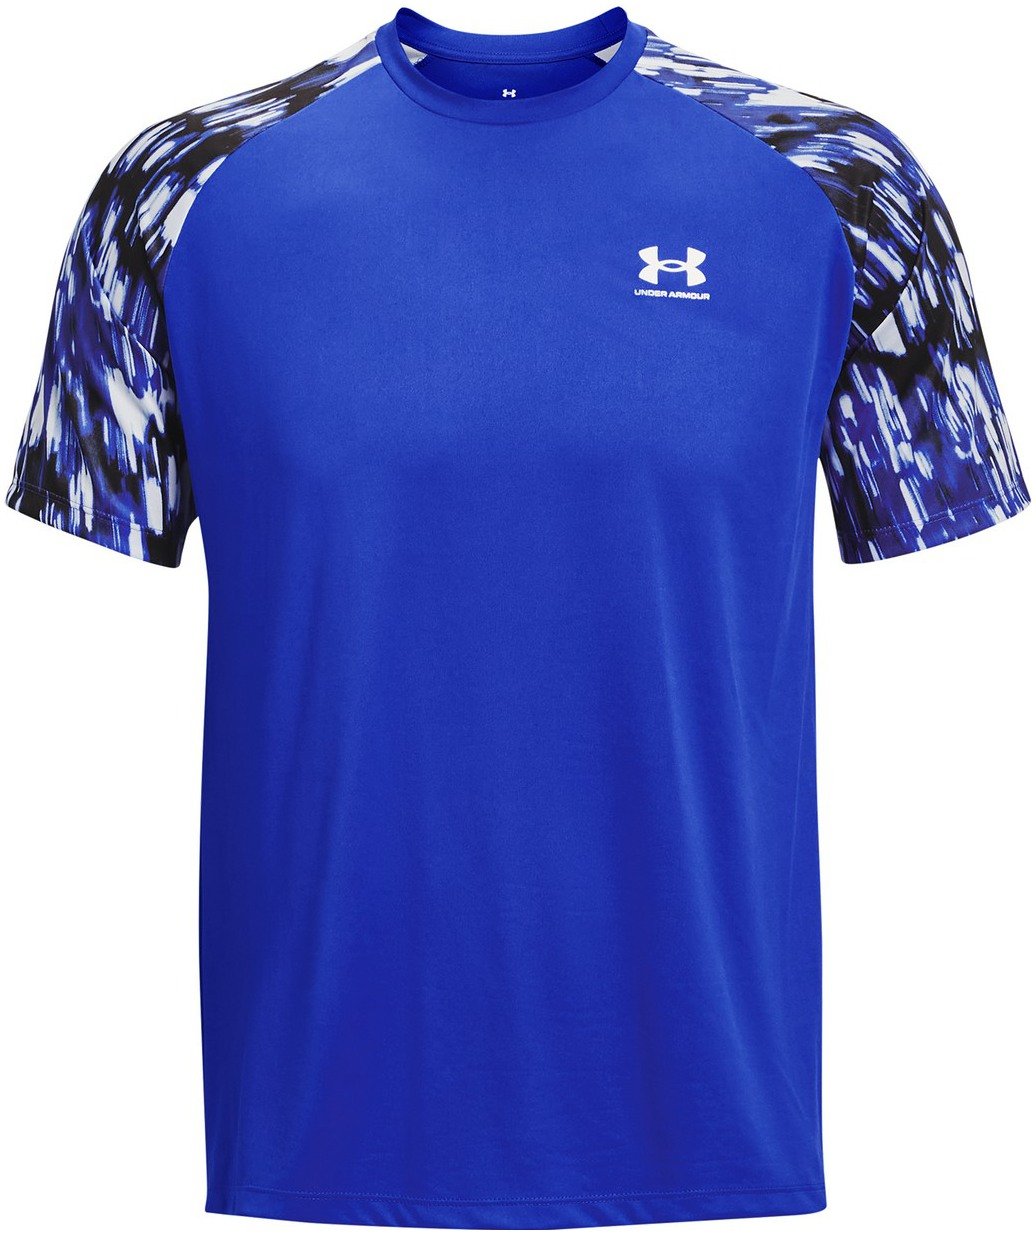 Under Armour TECH 2.0 PRINTED SS M